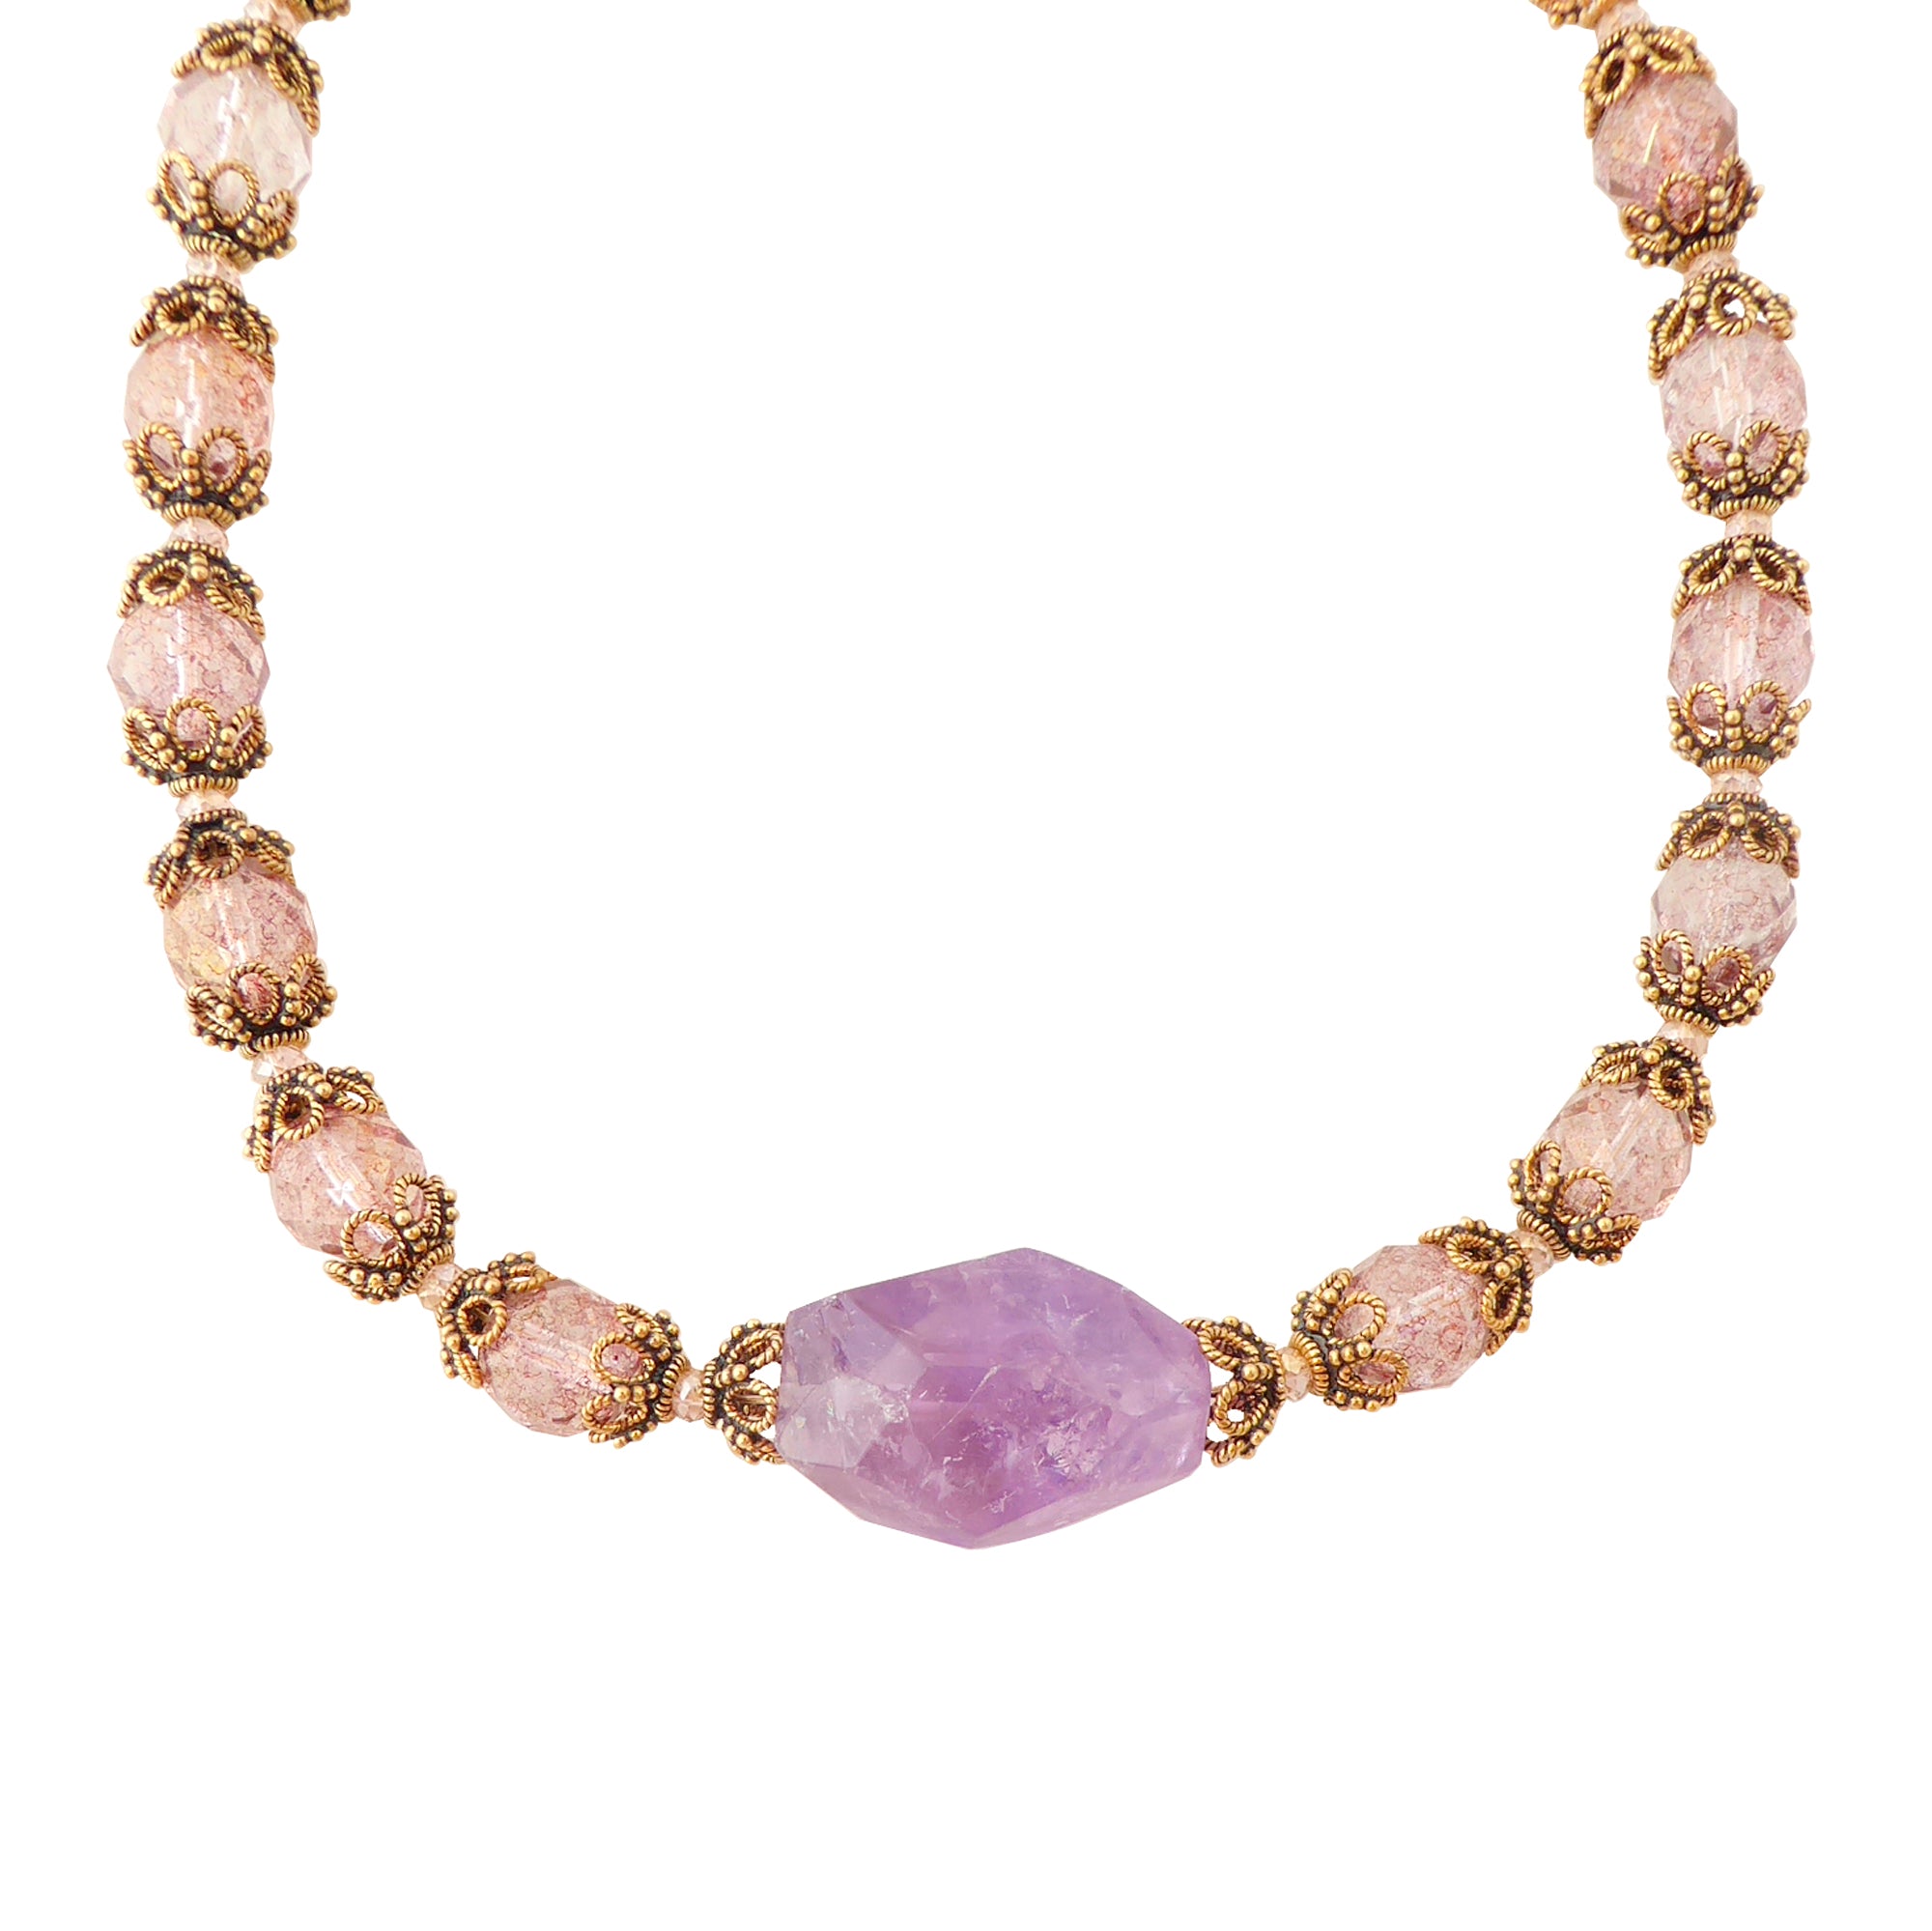 Amethyst rococo necklace by Jenny Dayco 1